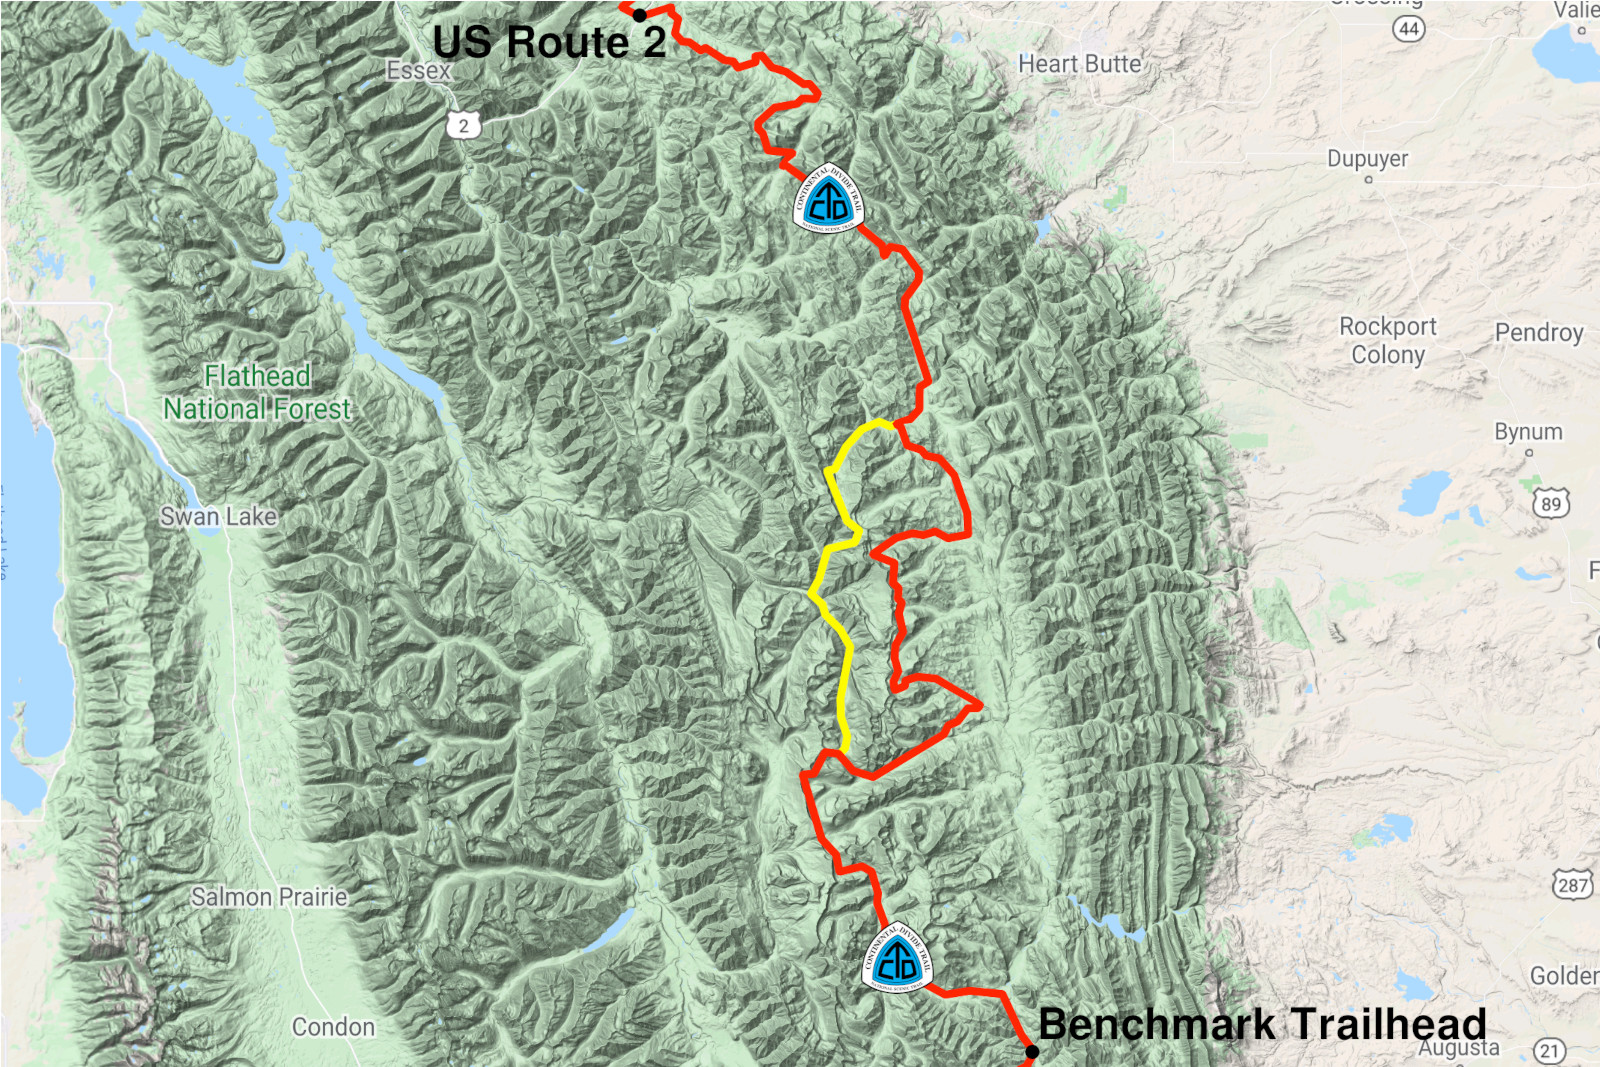 Terrain view map of the Continental Divide Trail within the Bob Marshall Wilderness